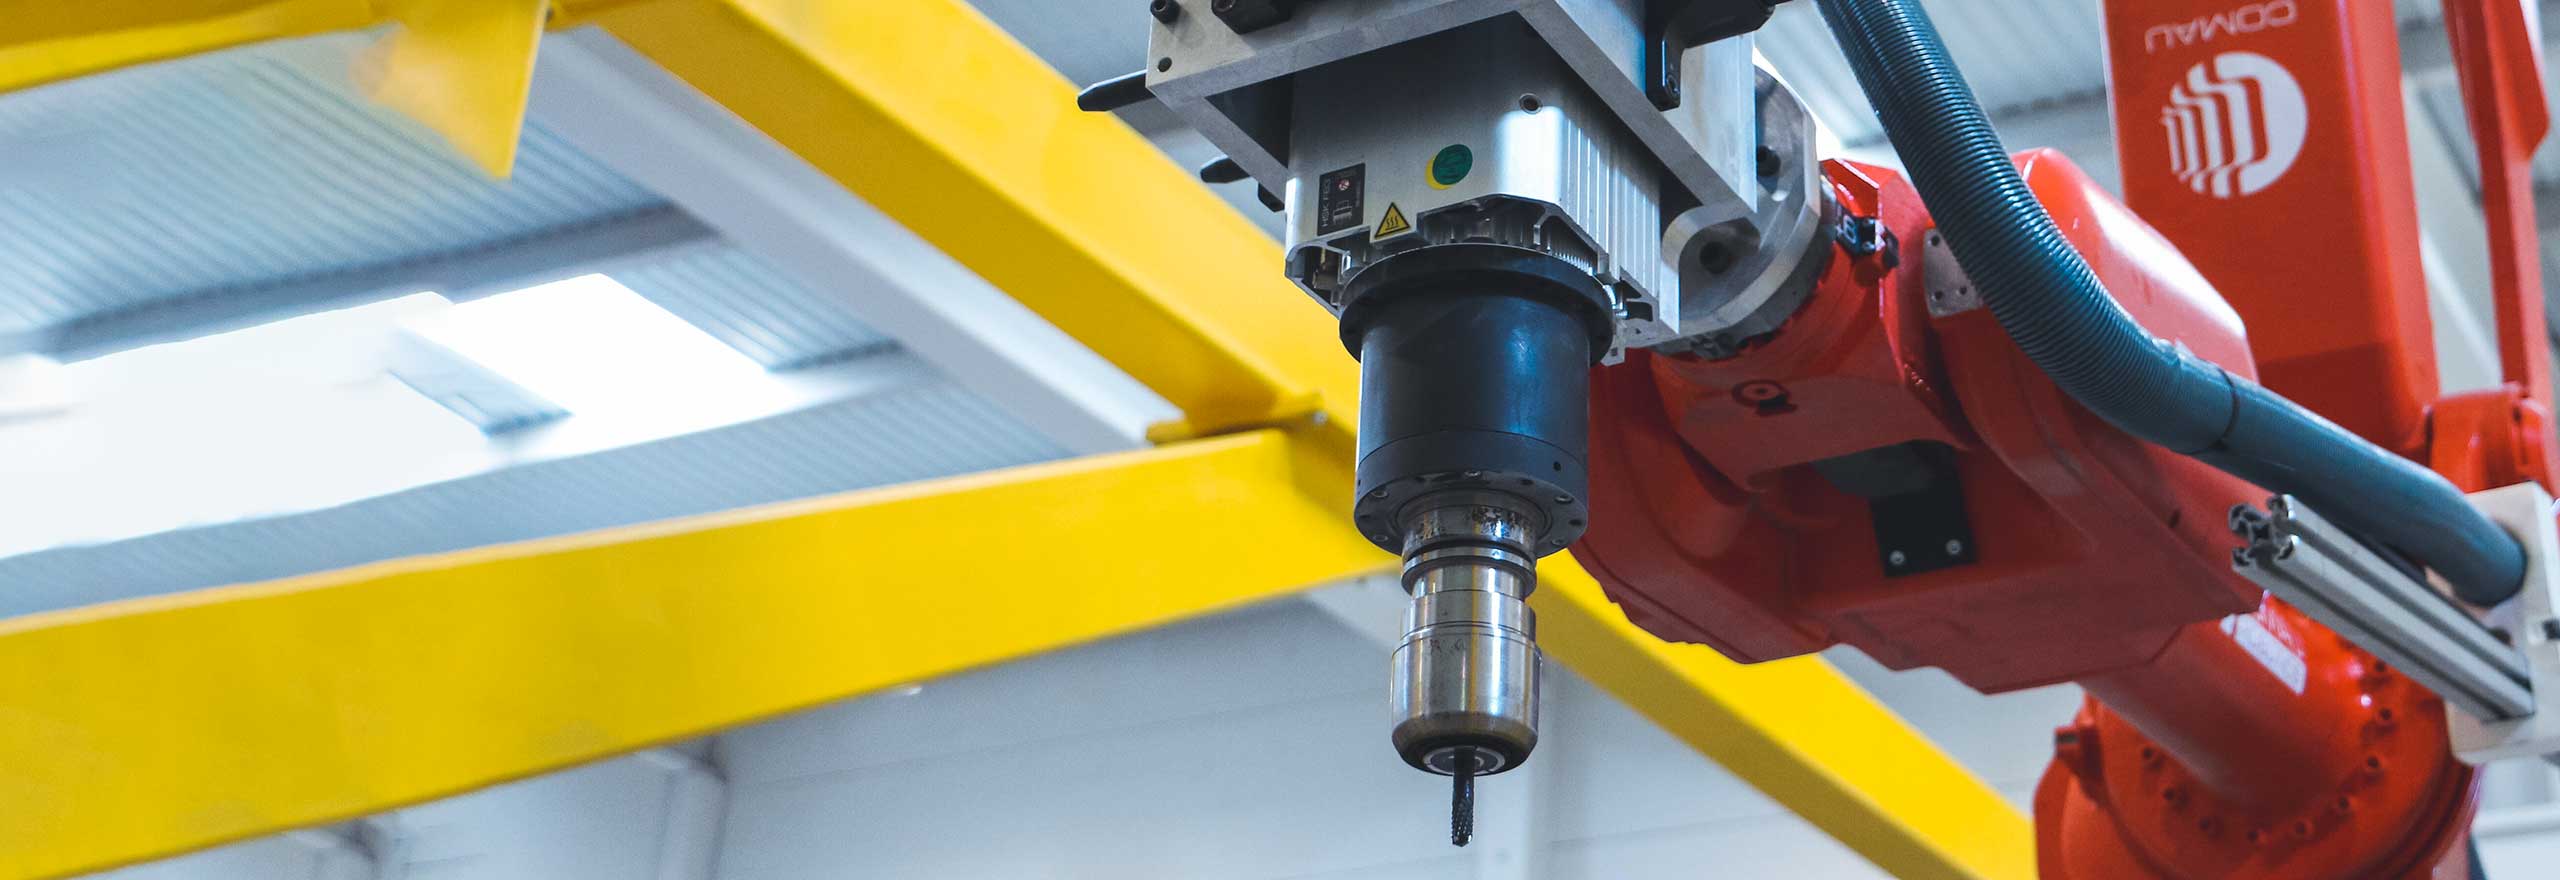 A machine control sensor mounted on an industrial robot ensures accurate drilling operations.